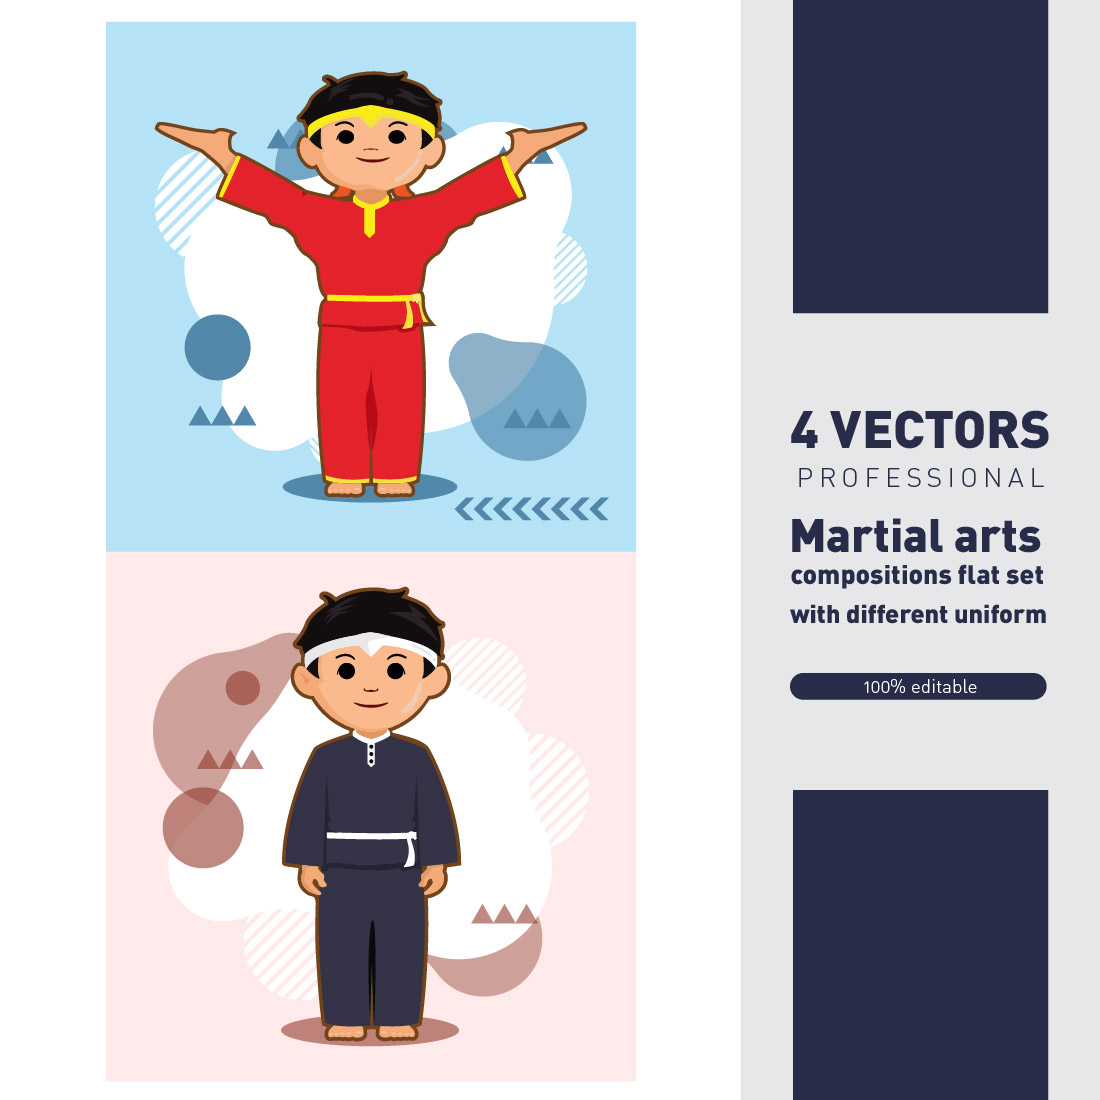 Martial Arts Compositions Flat Set for Kids cover image.